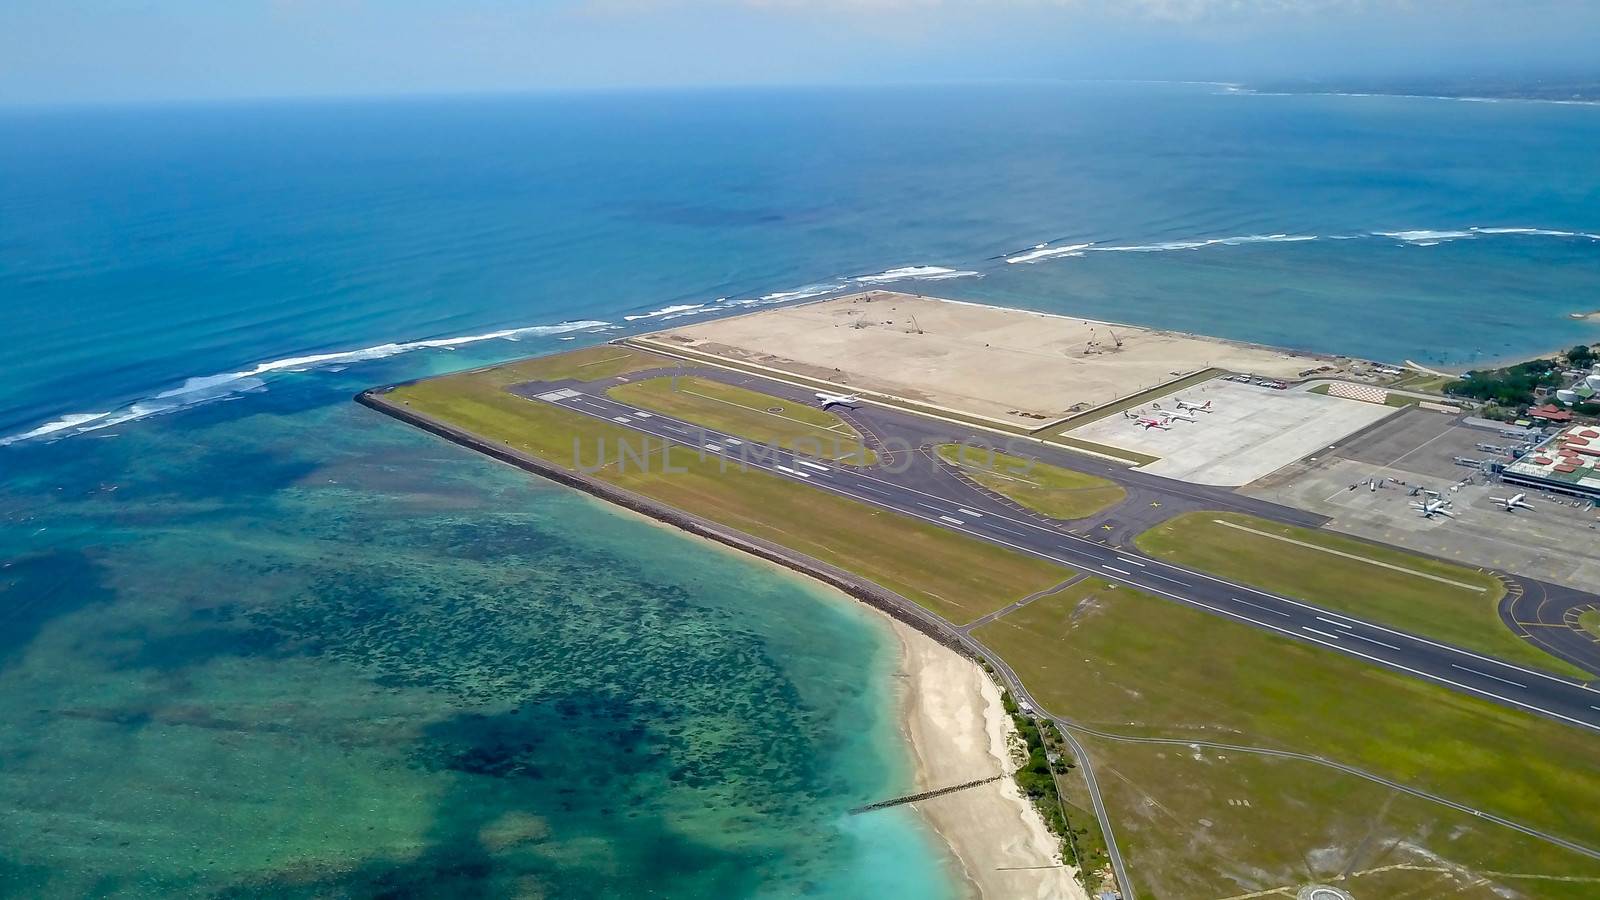 Commercial aircraft taxi on the runway at Denpasar Airport in Bali, Indonesia. Drone view of a big jet preparing to take off. Jet airplane turns to runway. Passenger jet prepares for departure.